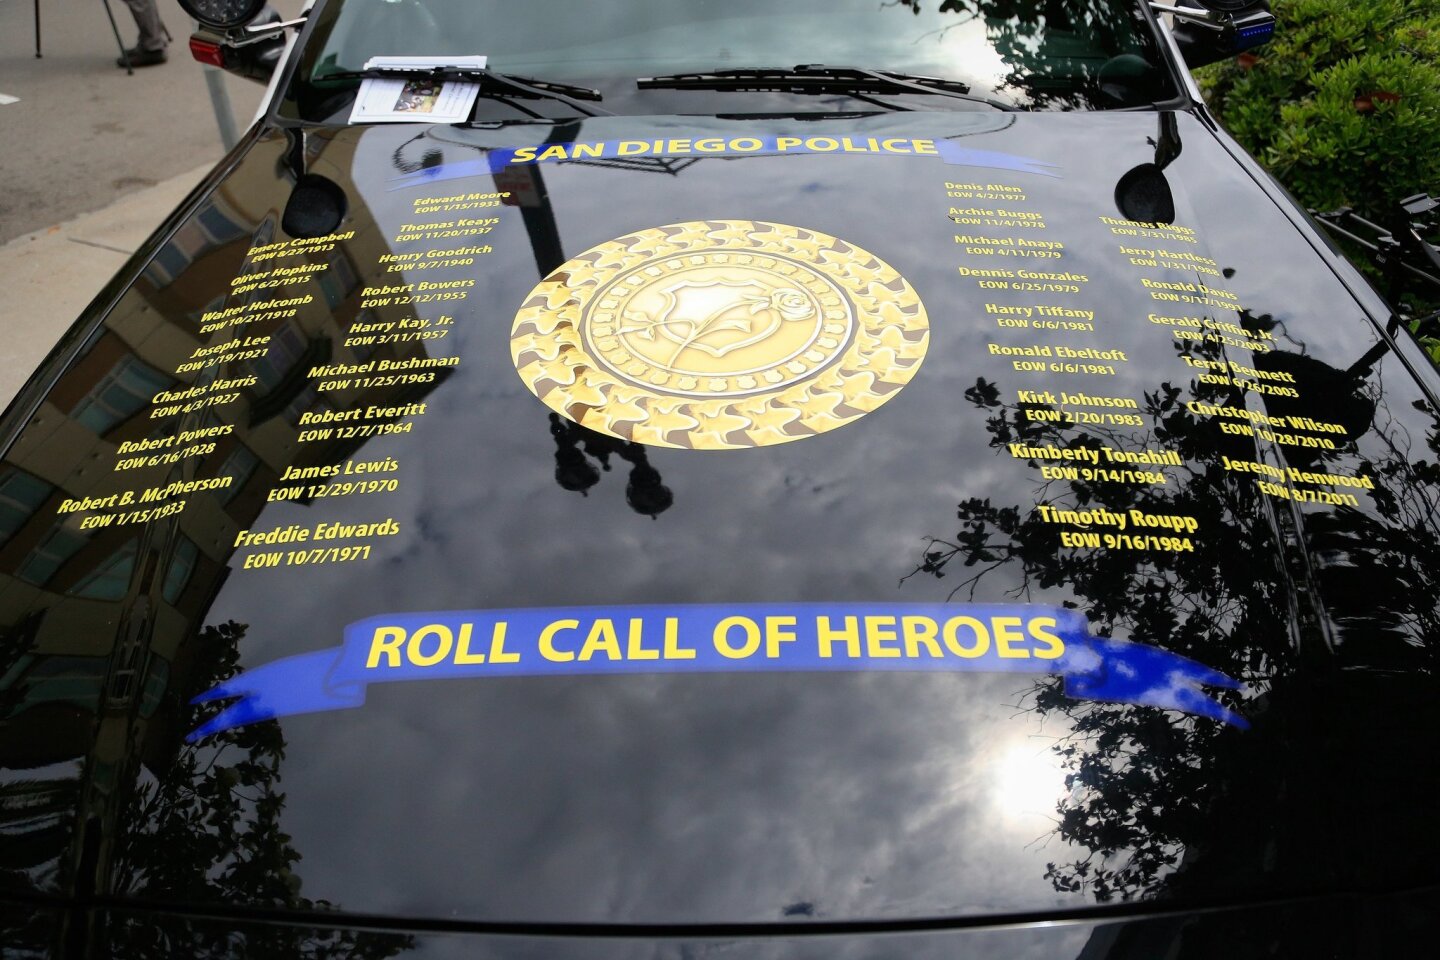 Photo of the hood of police car with "Roll Call of Heroes" list of names